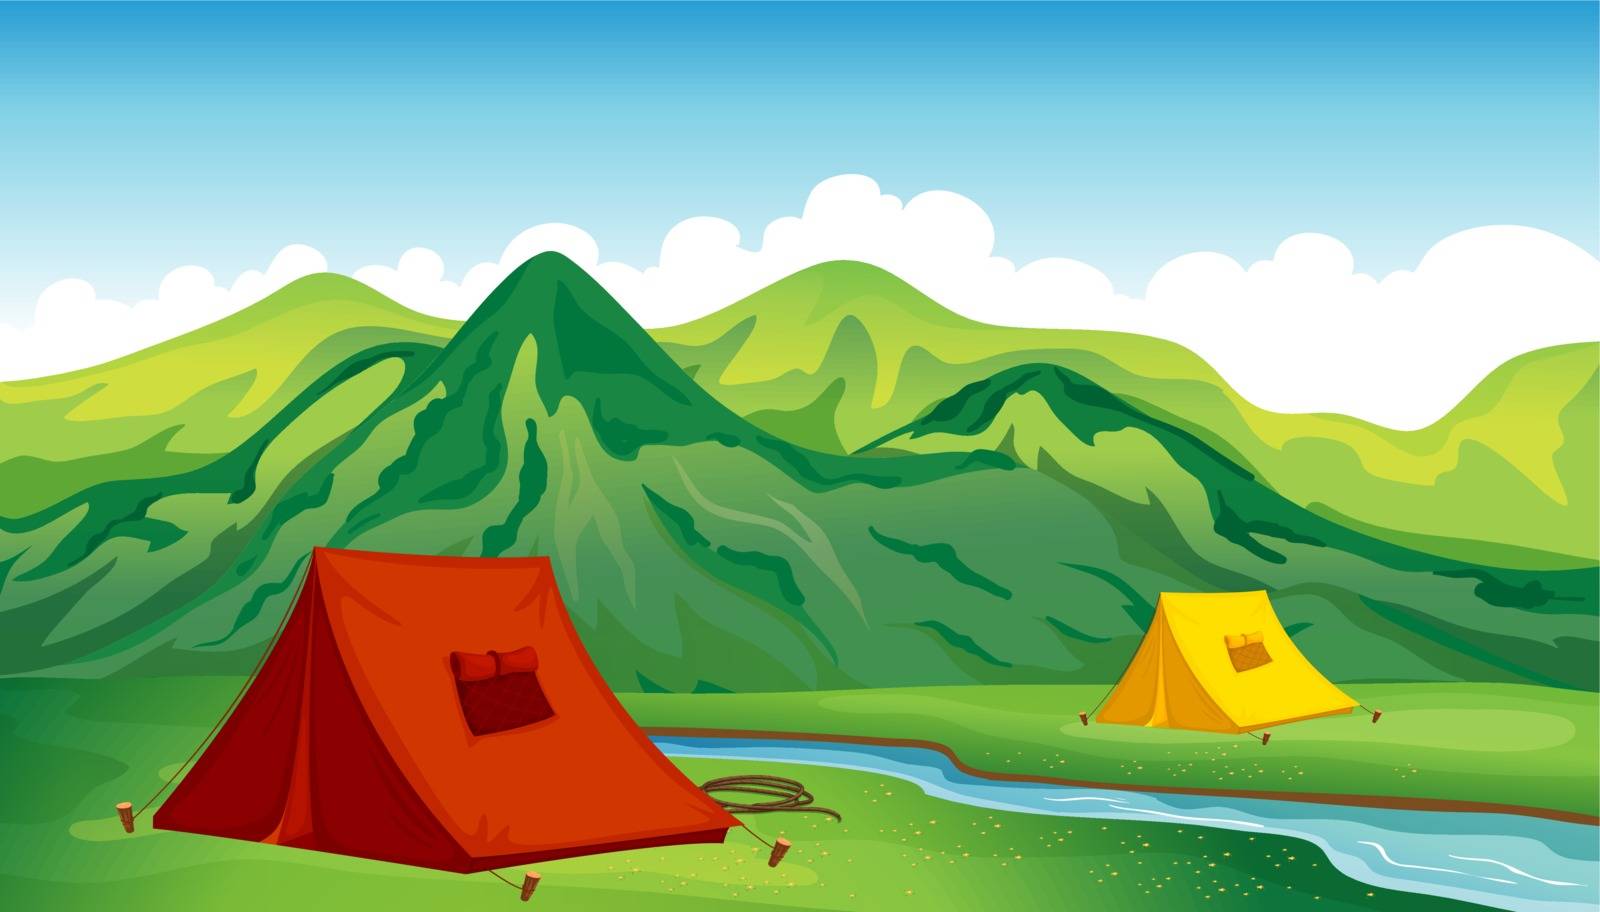 Illustration of a camping site near the river and mountain